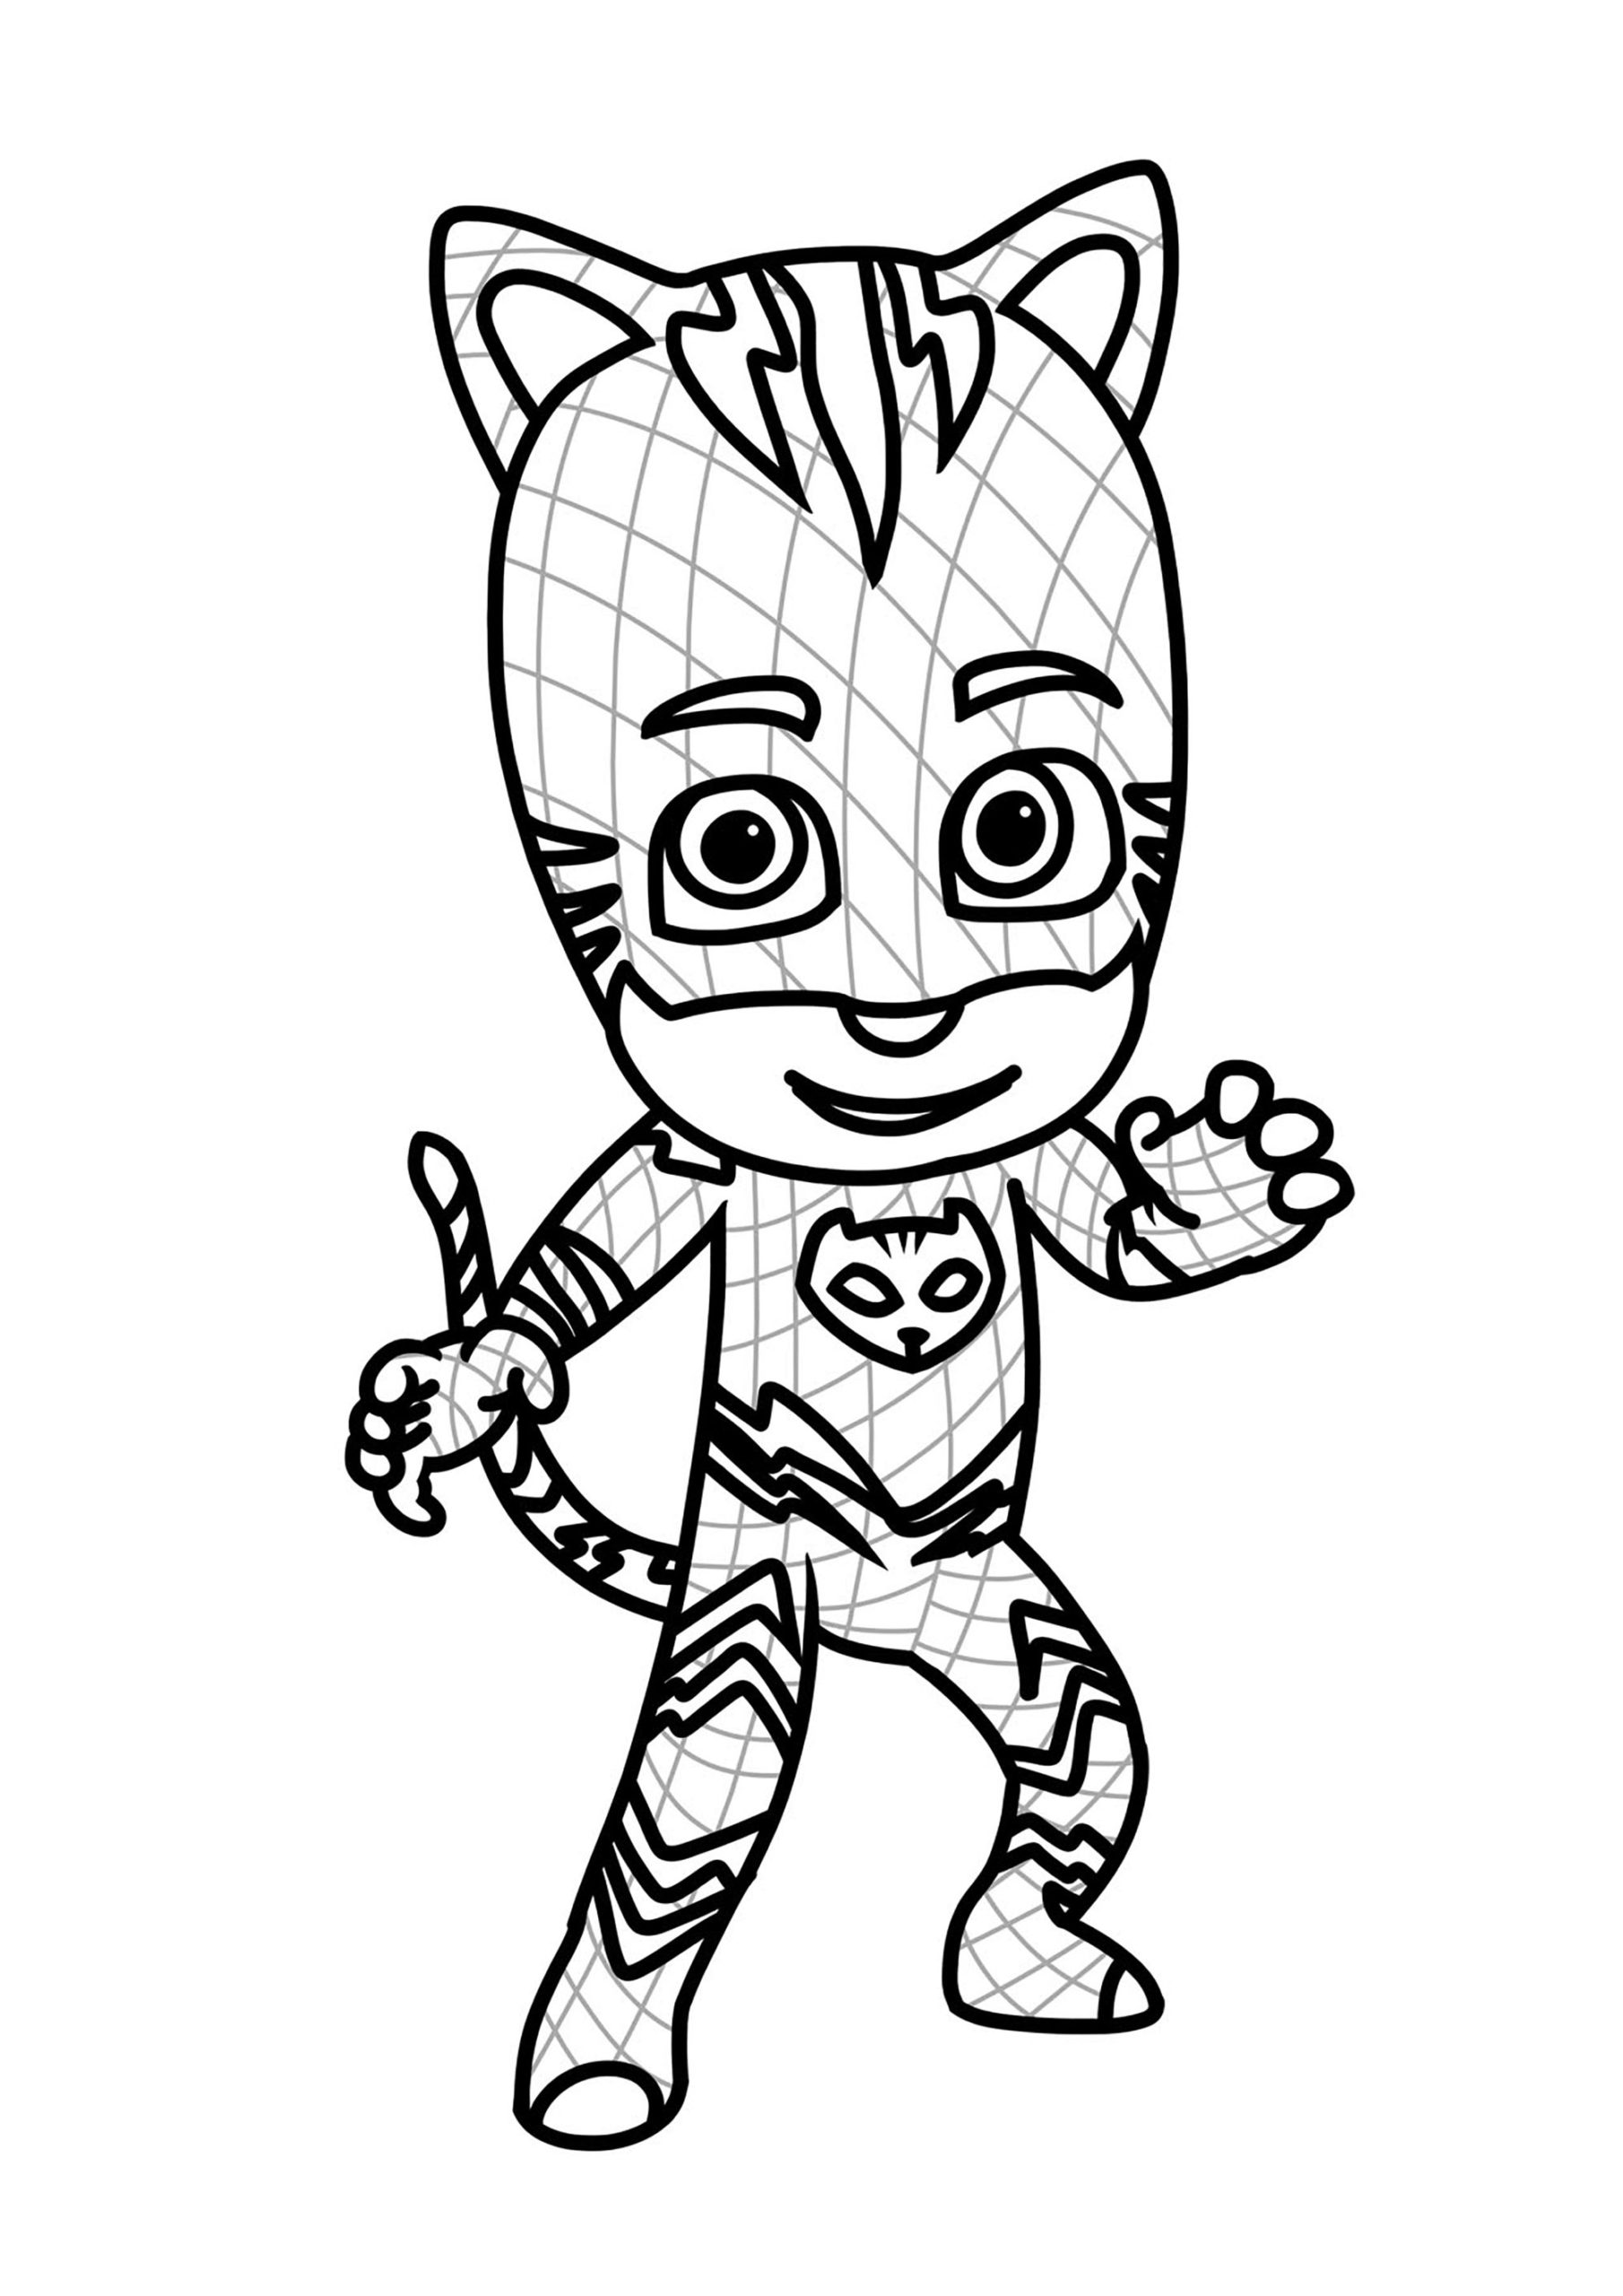 Coloring Pages : Pj Masks Free To Color For Kids Coloring Mask ...